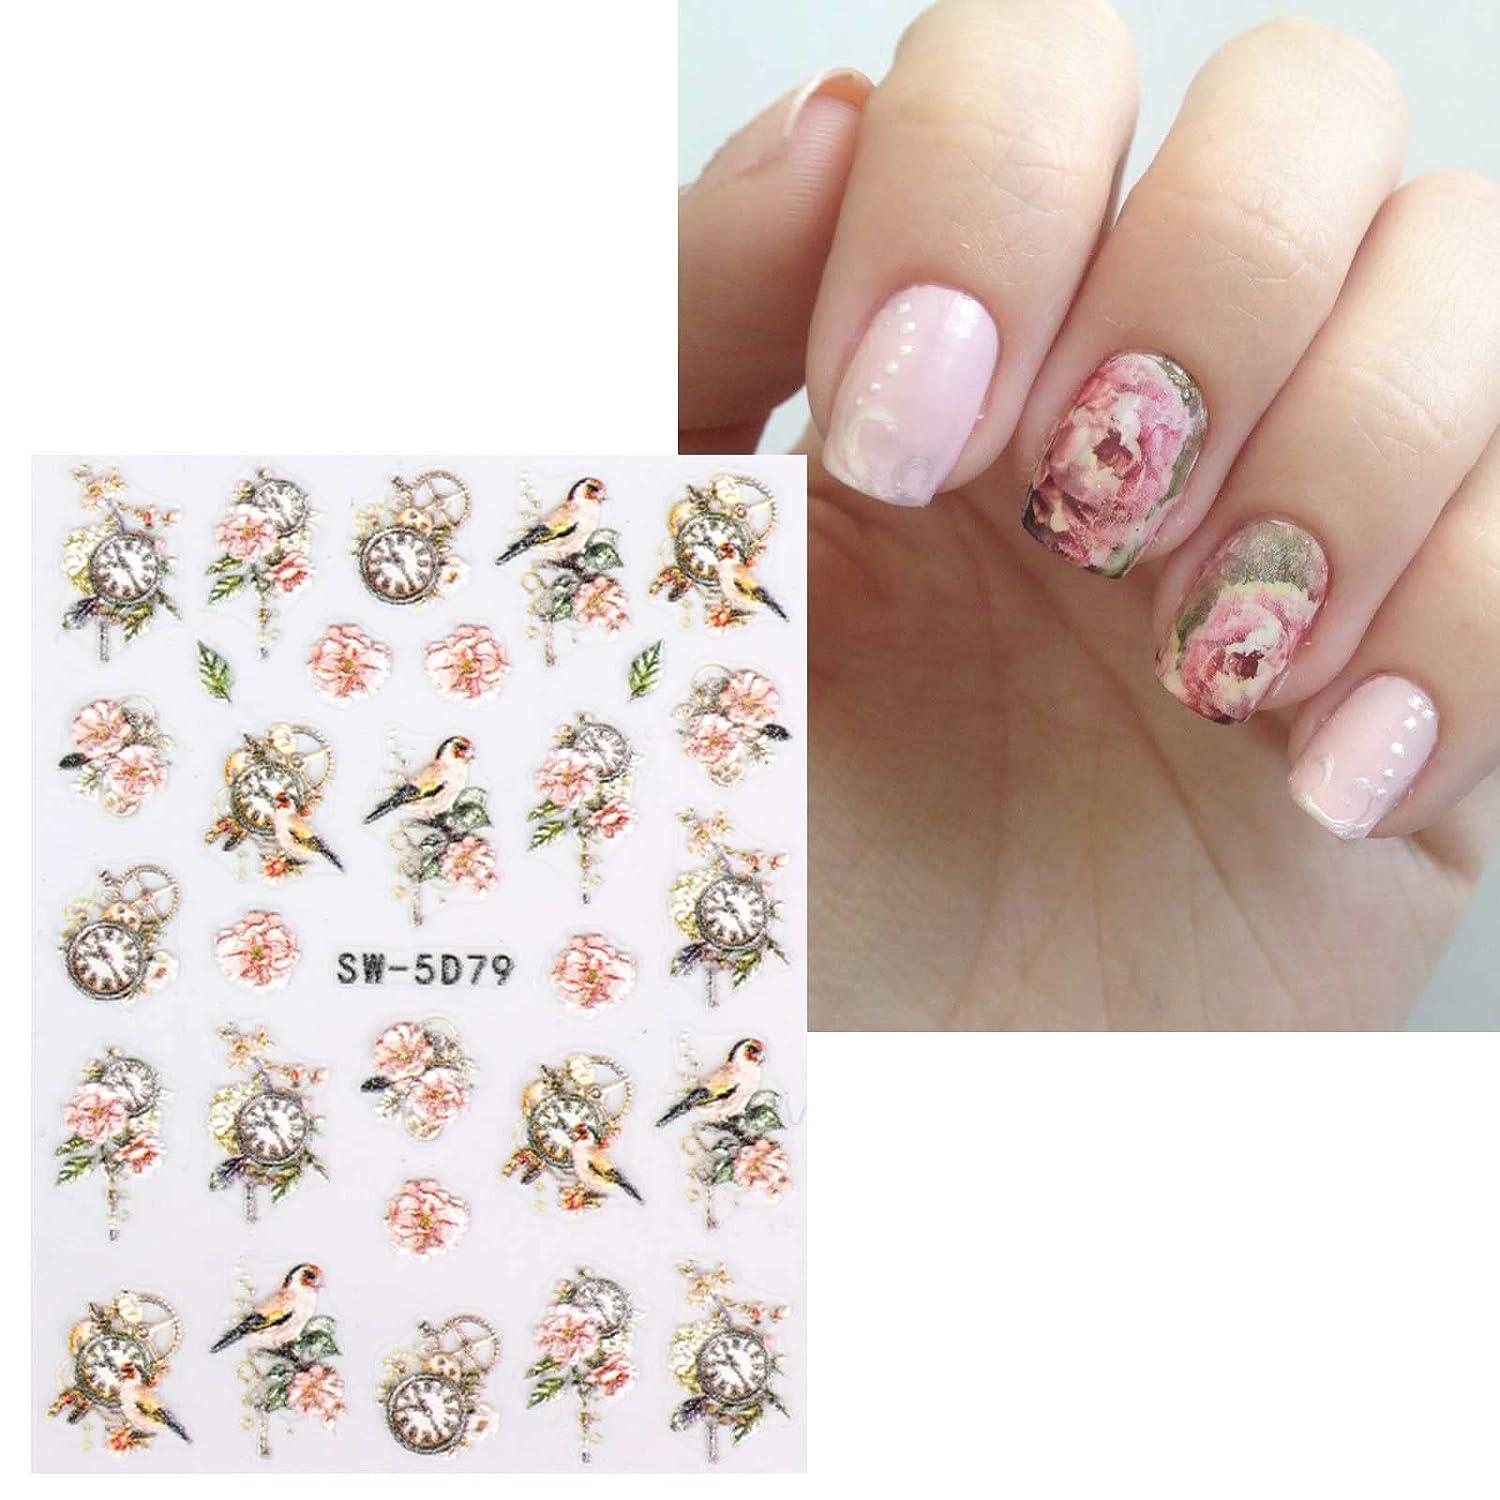 JMEOWIO 12 Sheets Spring Flower Nail Art Stickers Decals Self-Adhesive  Pegatinas Uñas Leaves Pink Nail Supplies Nail Art Design Decoration  Accessories